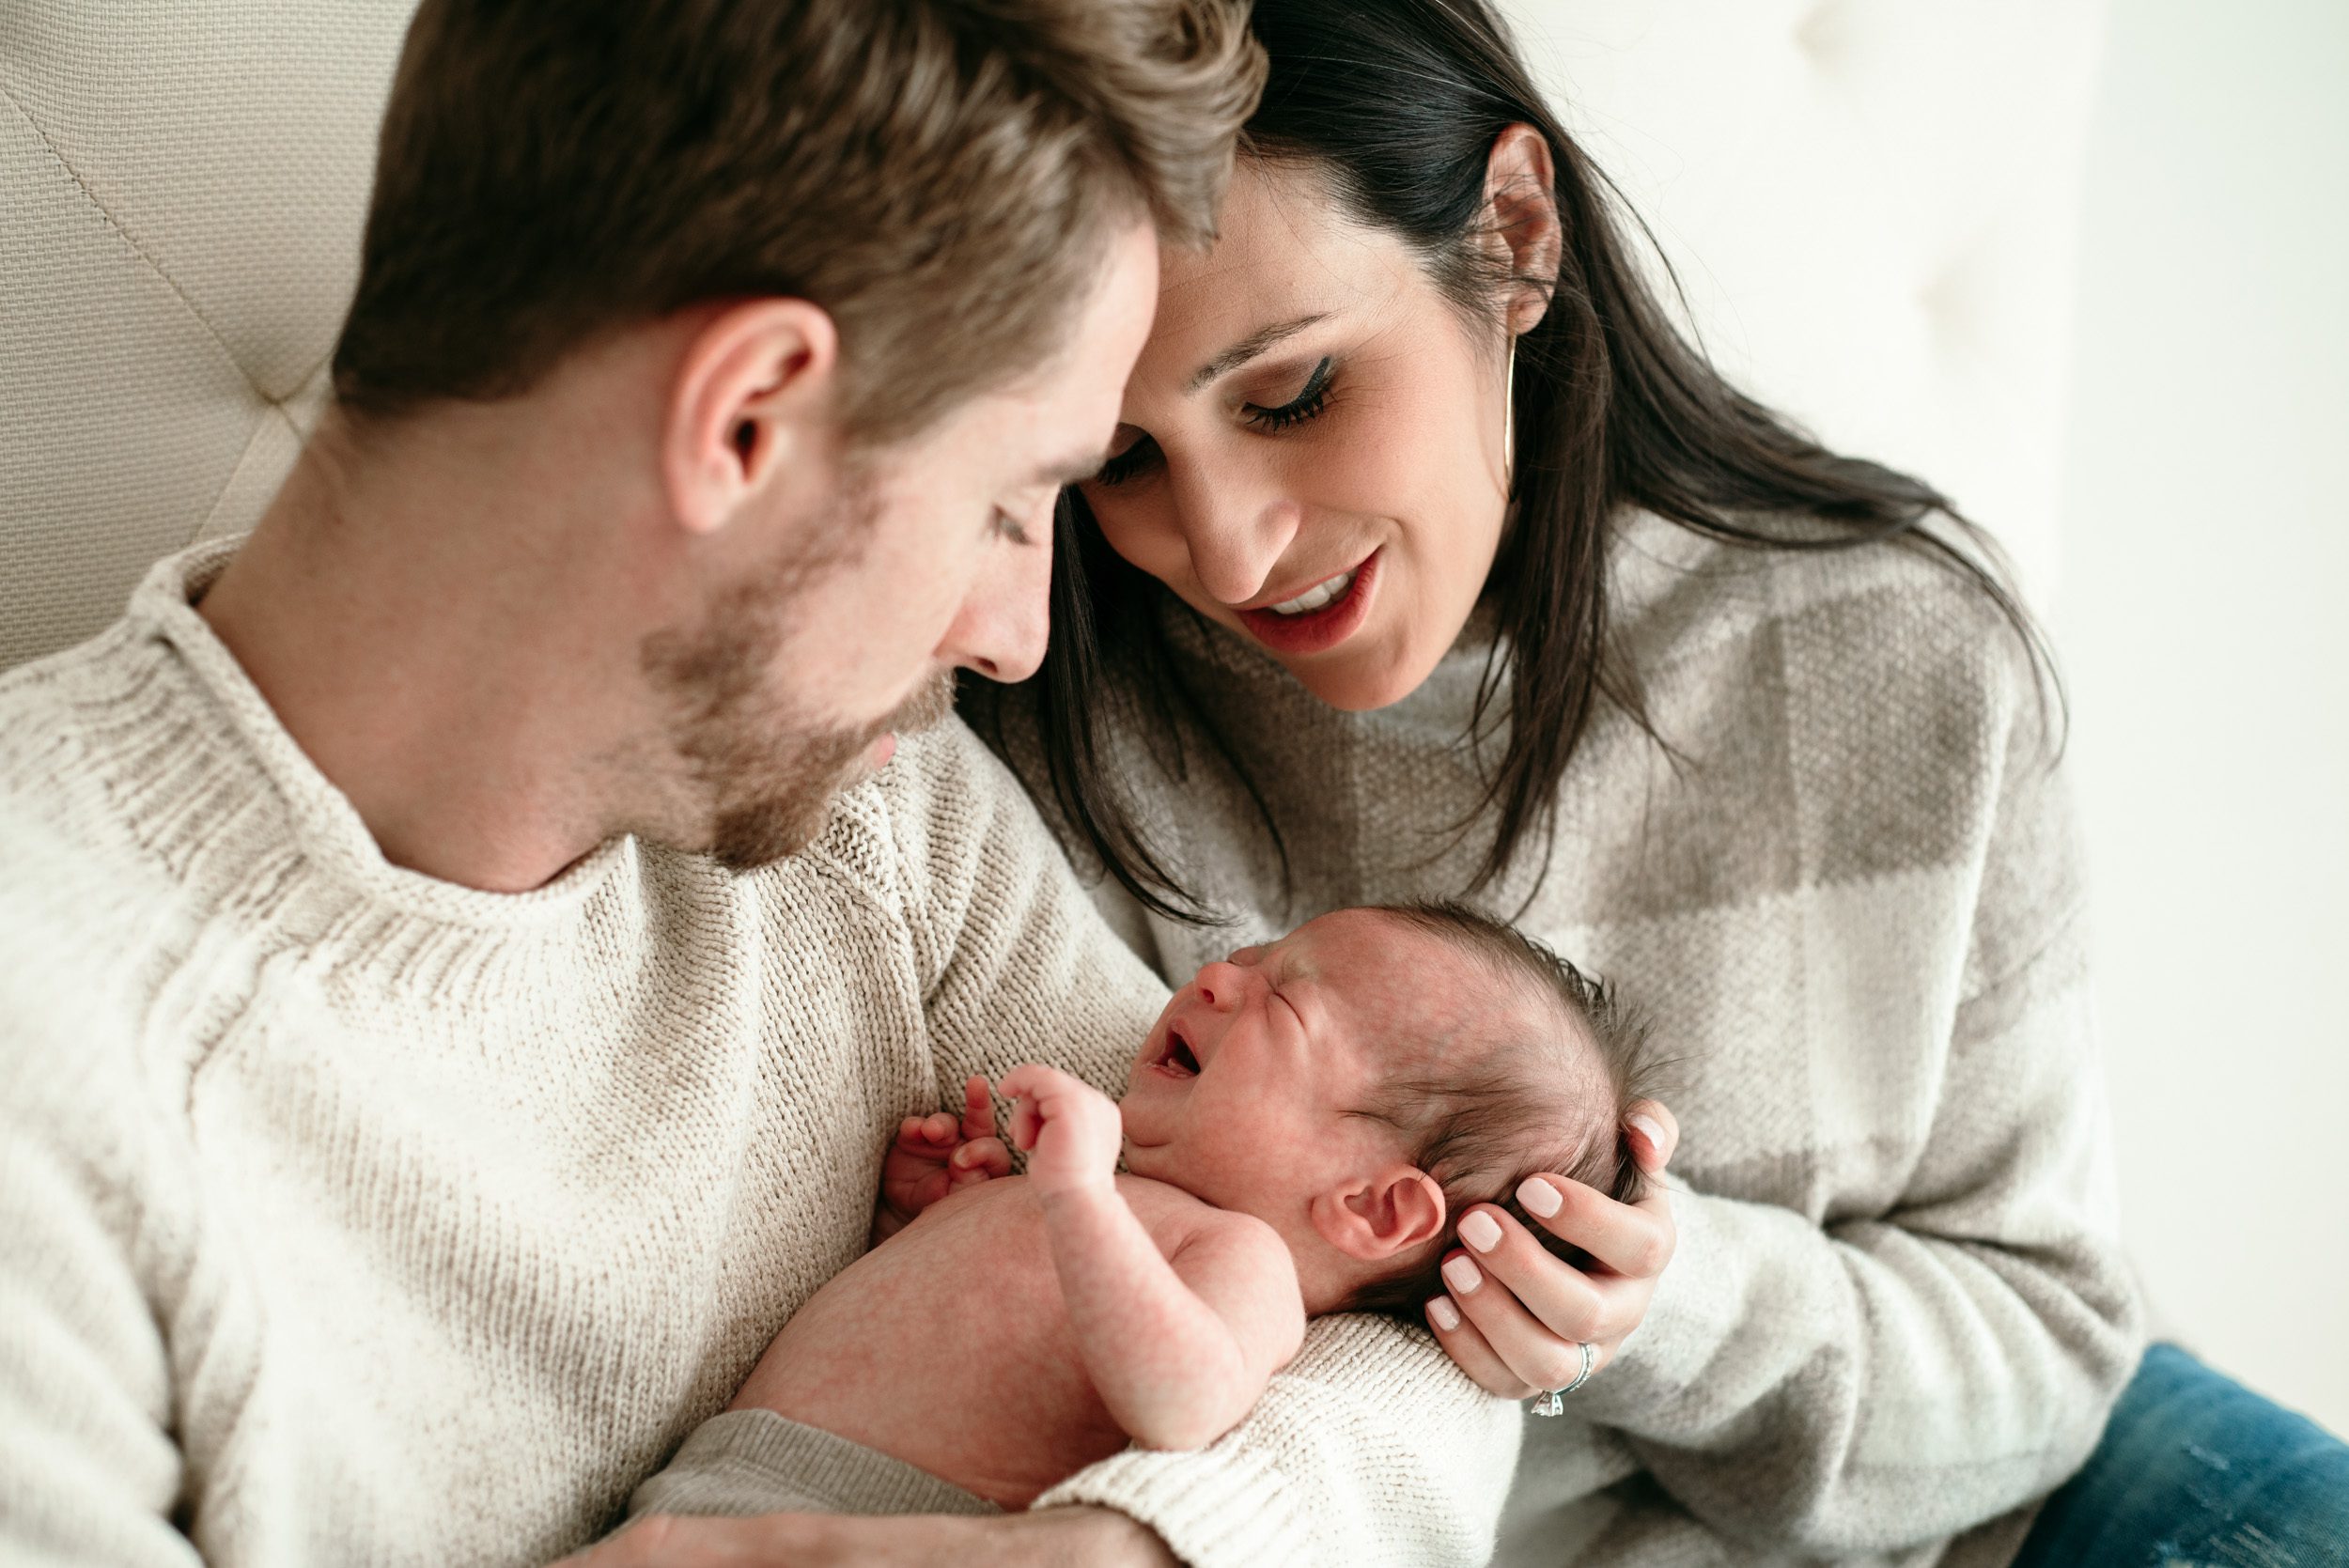 new parents wearing light neutral colored sweaters cradling their baby boy in their arms and comforting him as he cries during a newborn photos session